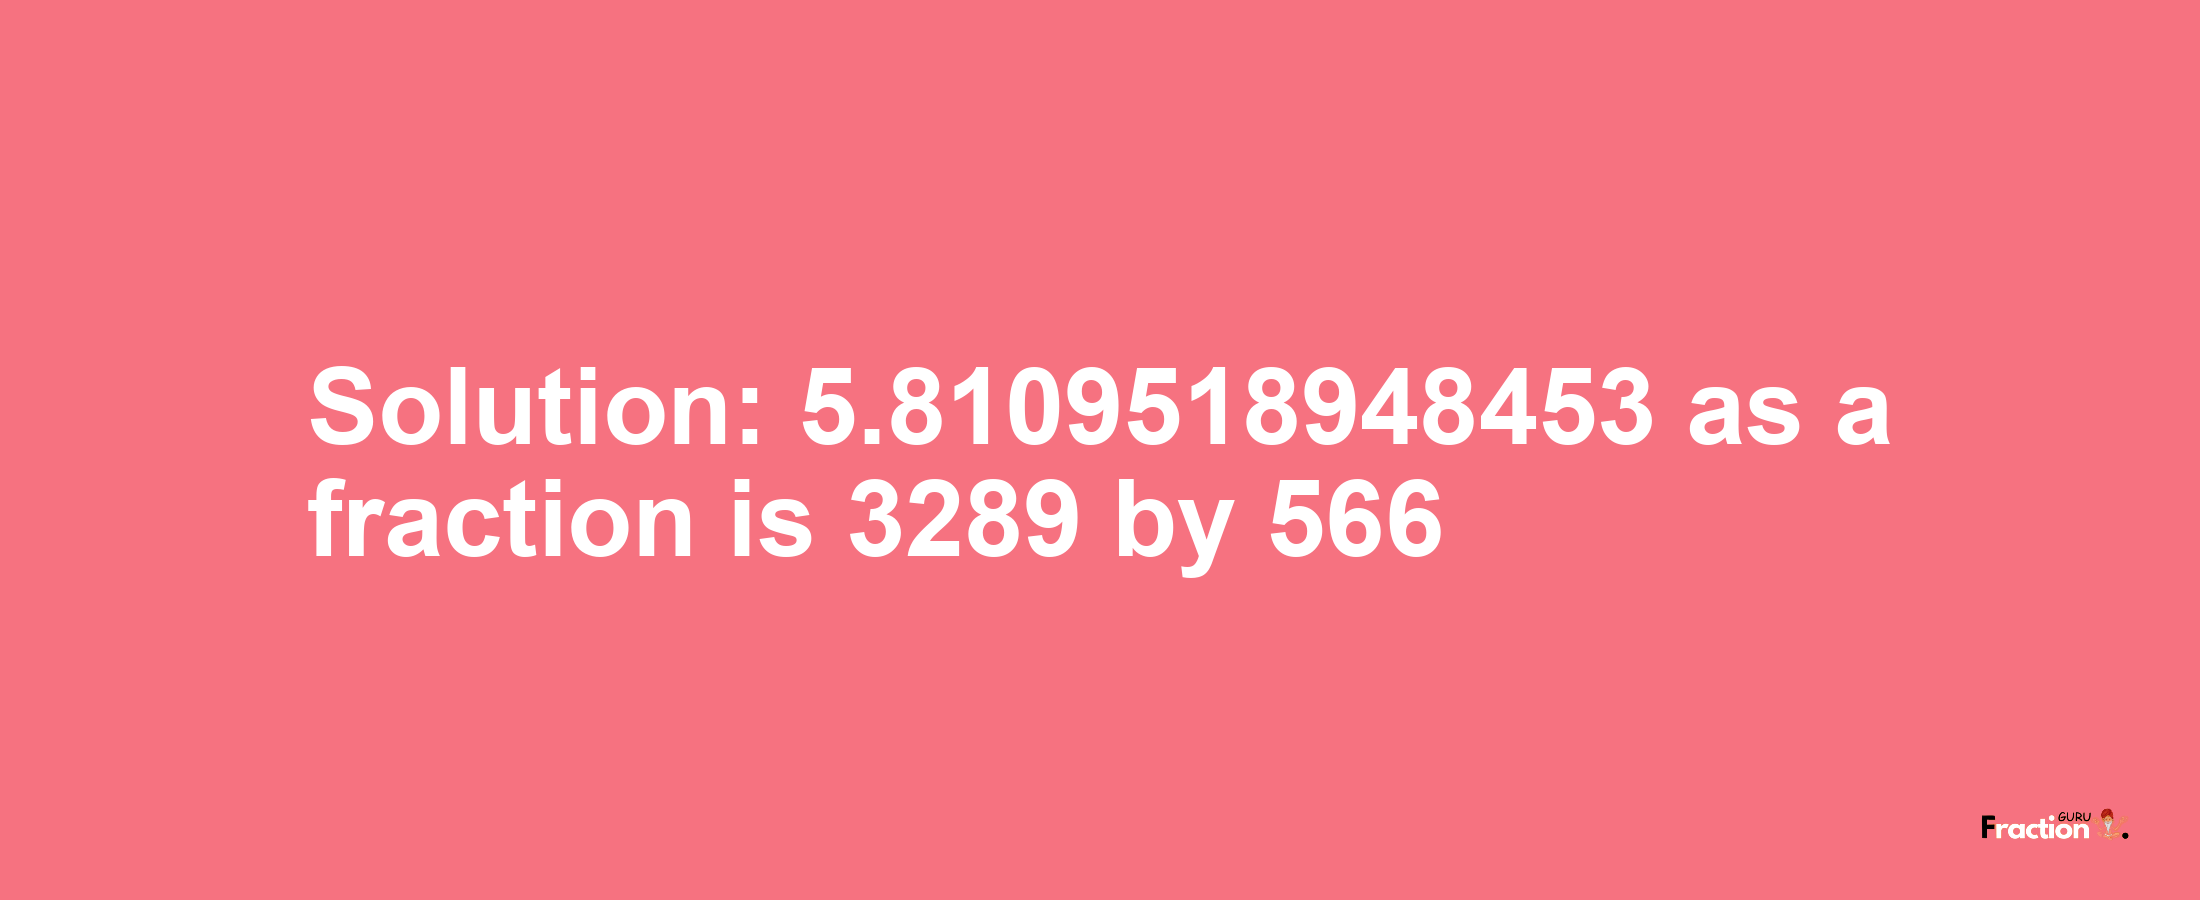 Solution:5.8109518948453 as a fraction is 3289/566